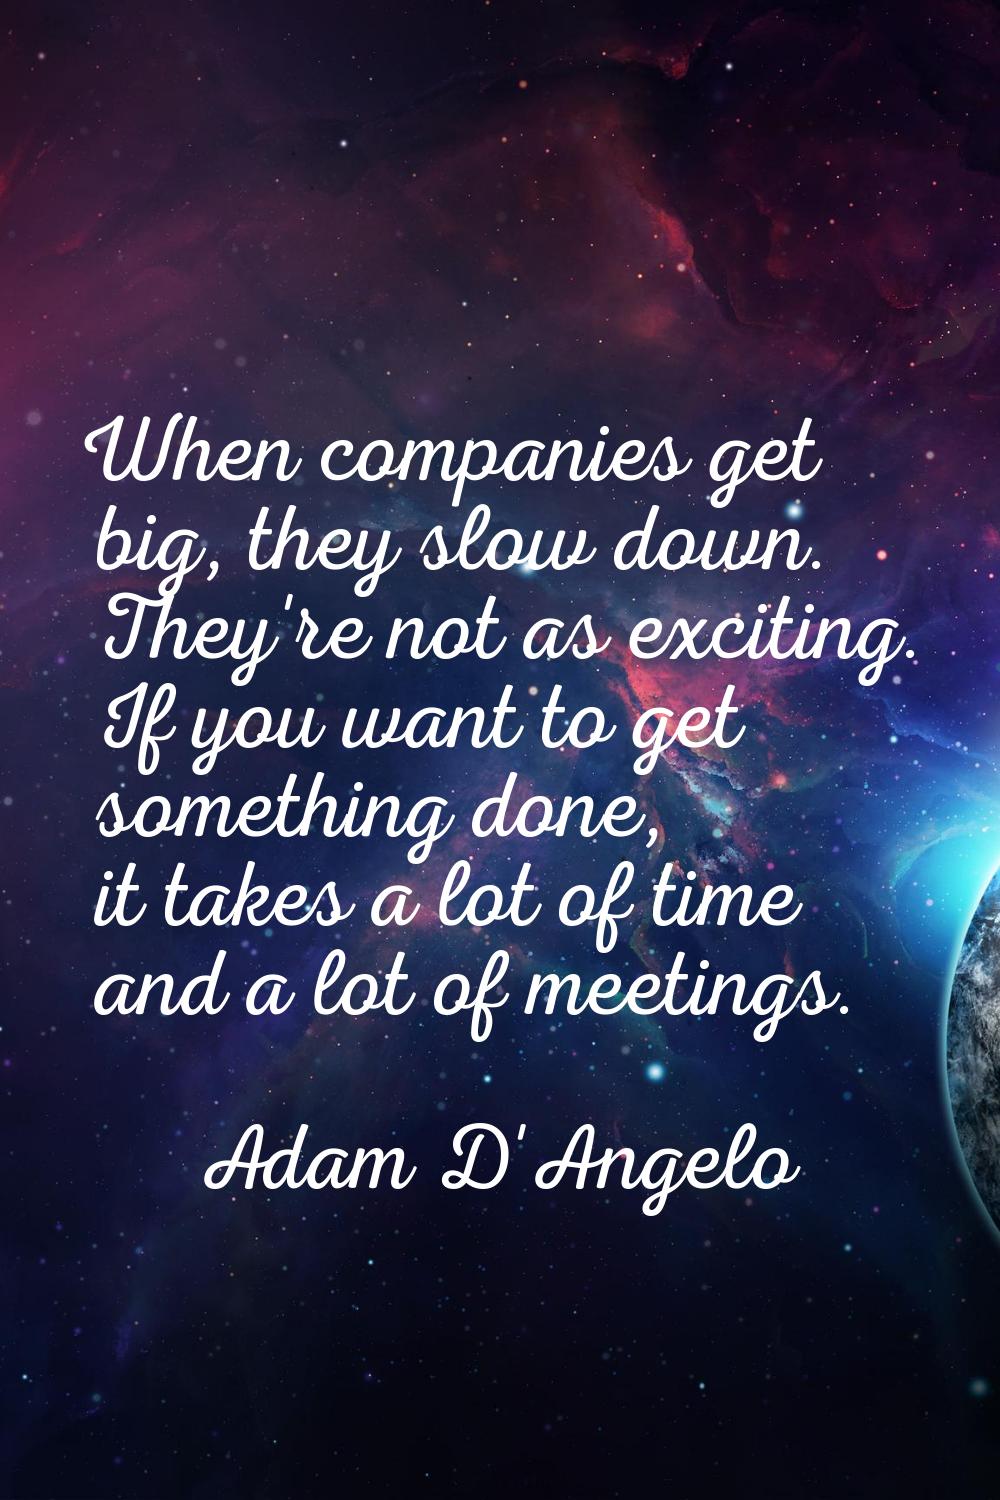 When companies get big, they slow down. They're not as exciting. If you want to get something done,